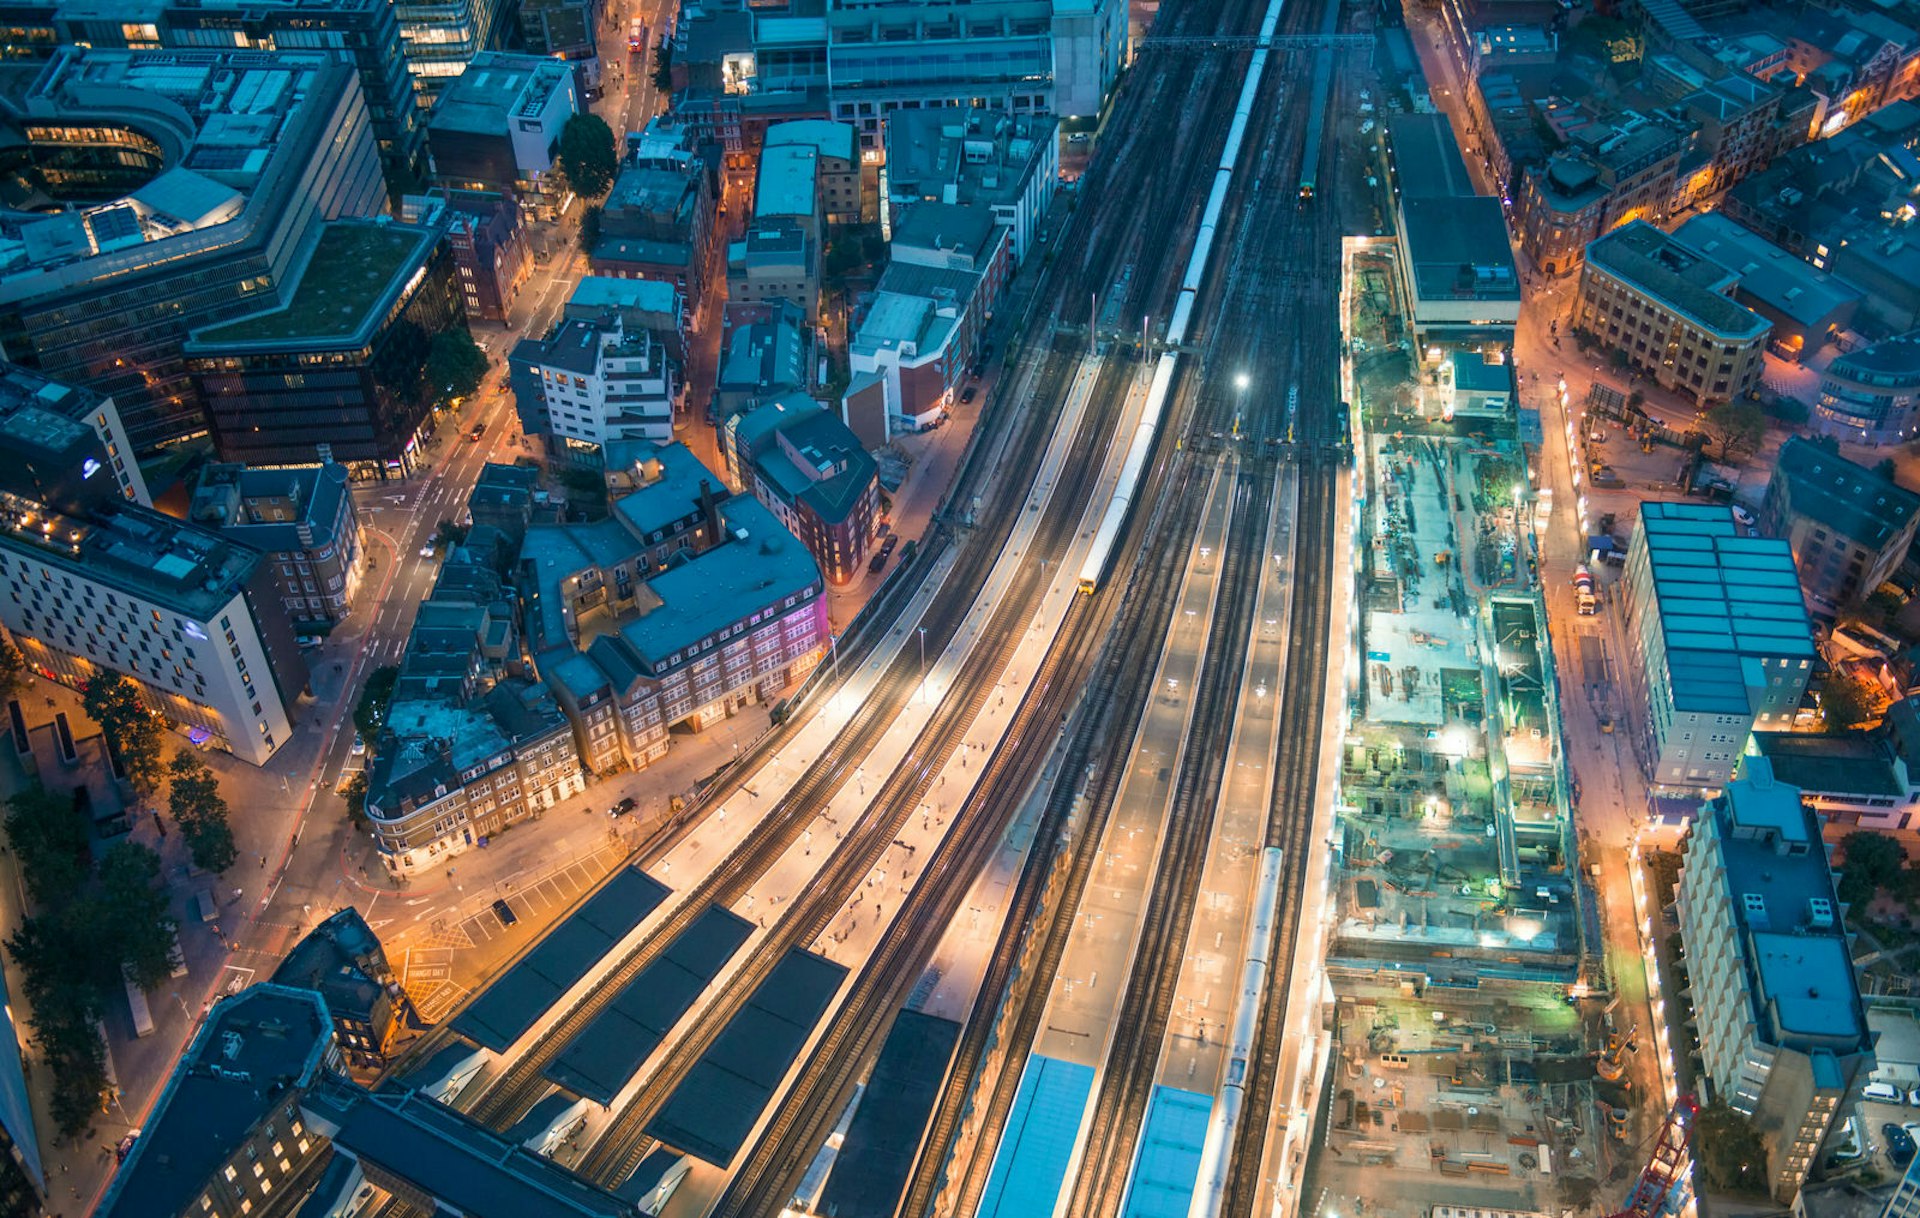 An aerial shot of Euston train station in London at night with two trains leaving the station